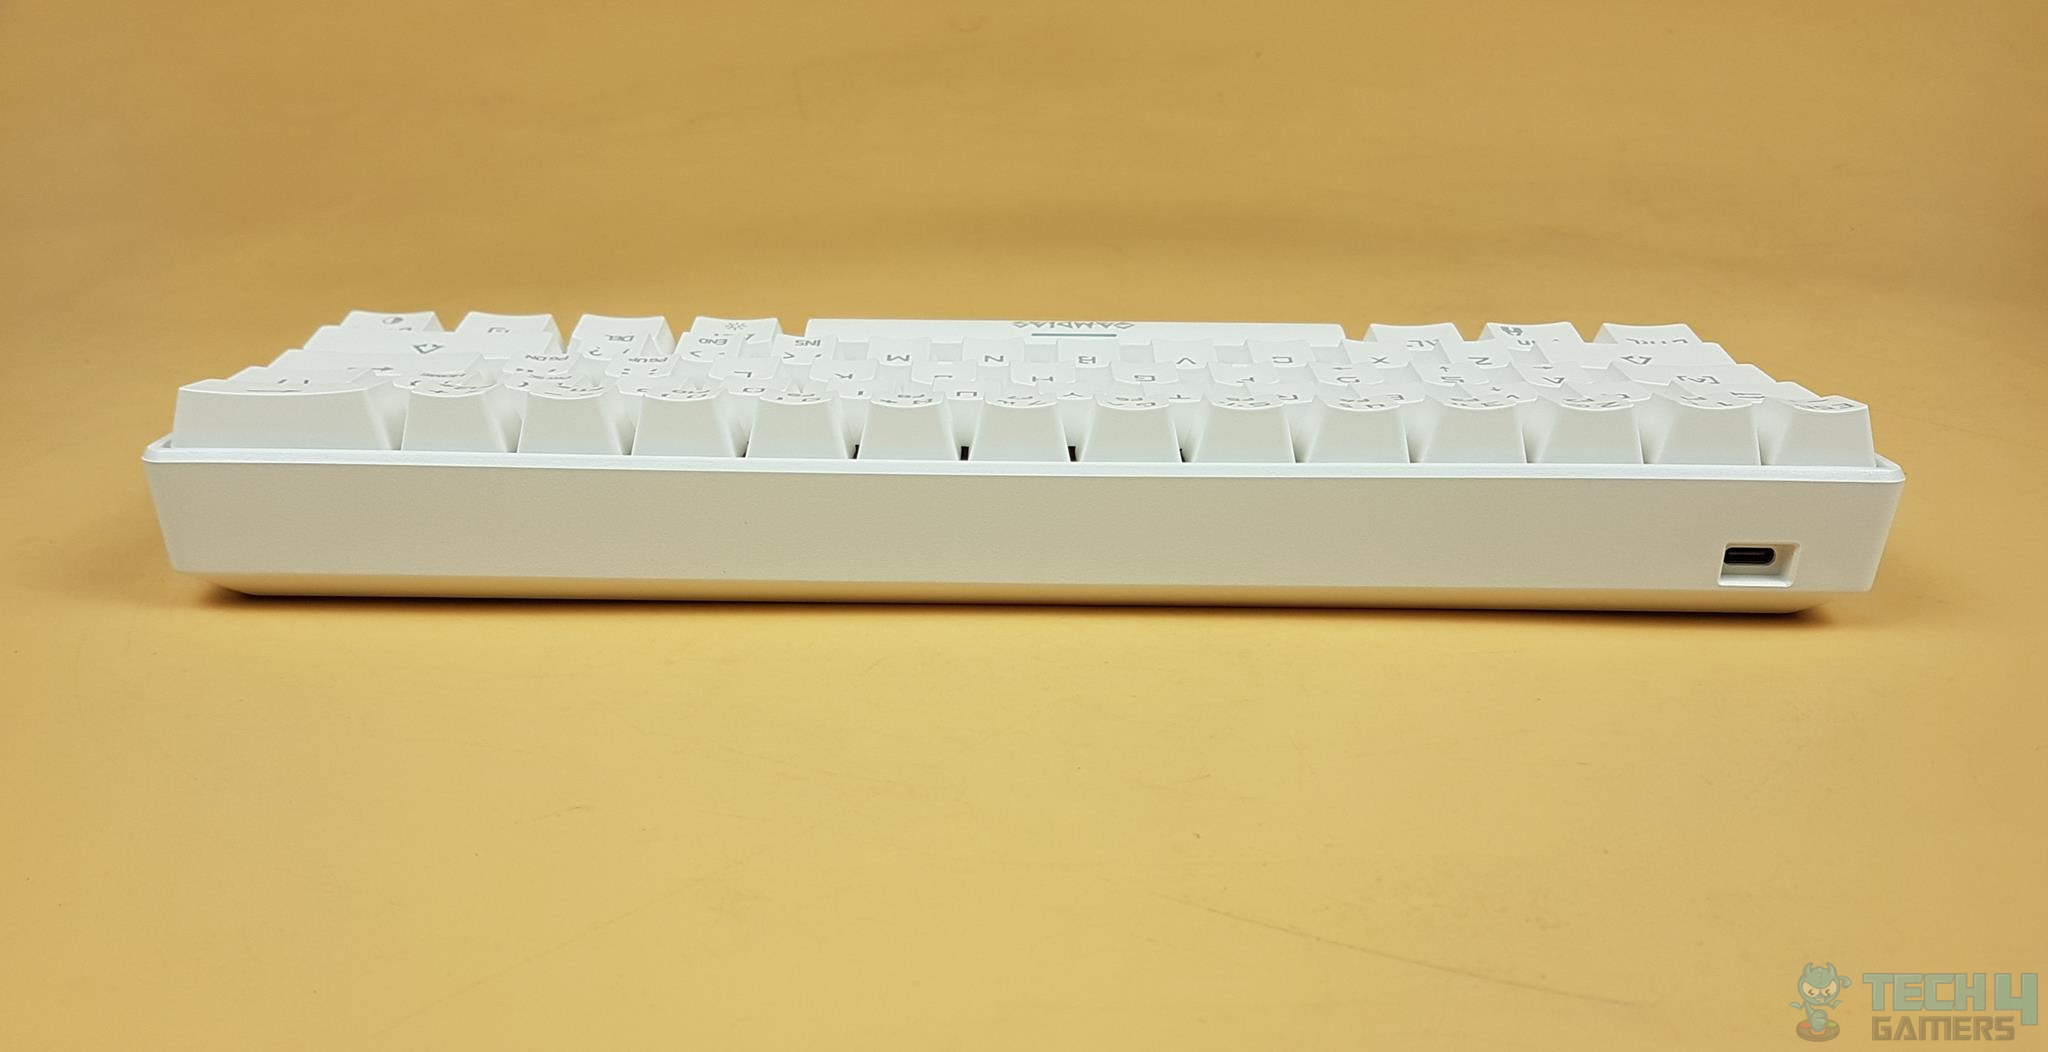 Displaying the GAMDIAS HERMES E4 3-IN-1 Combo’s Keyboard’s front view, with a cornered USB Type-C power connection being highlighted.